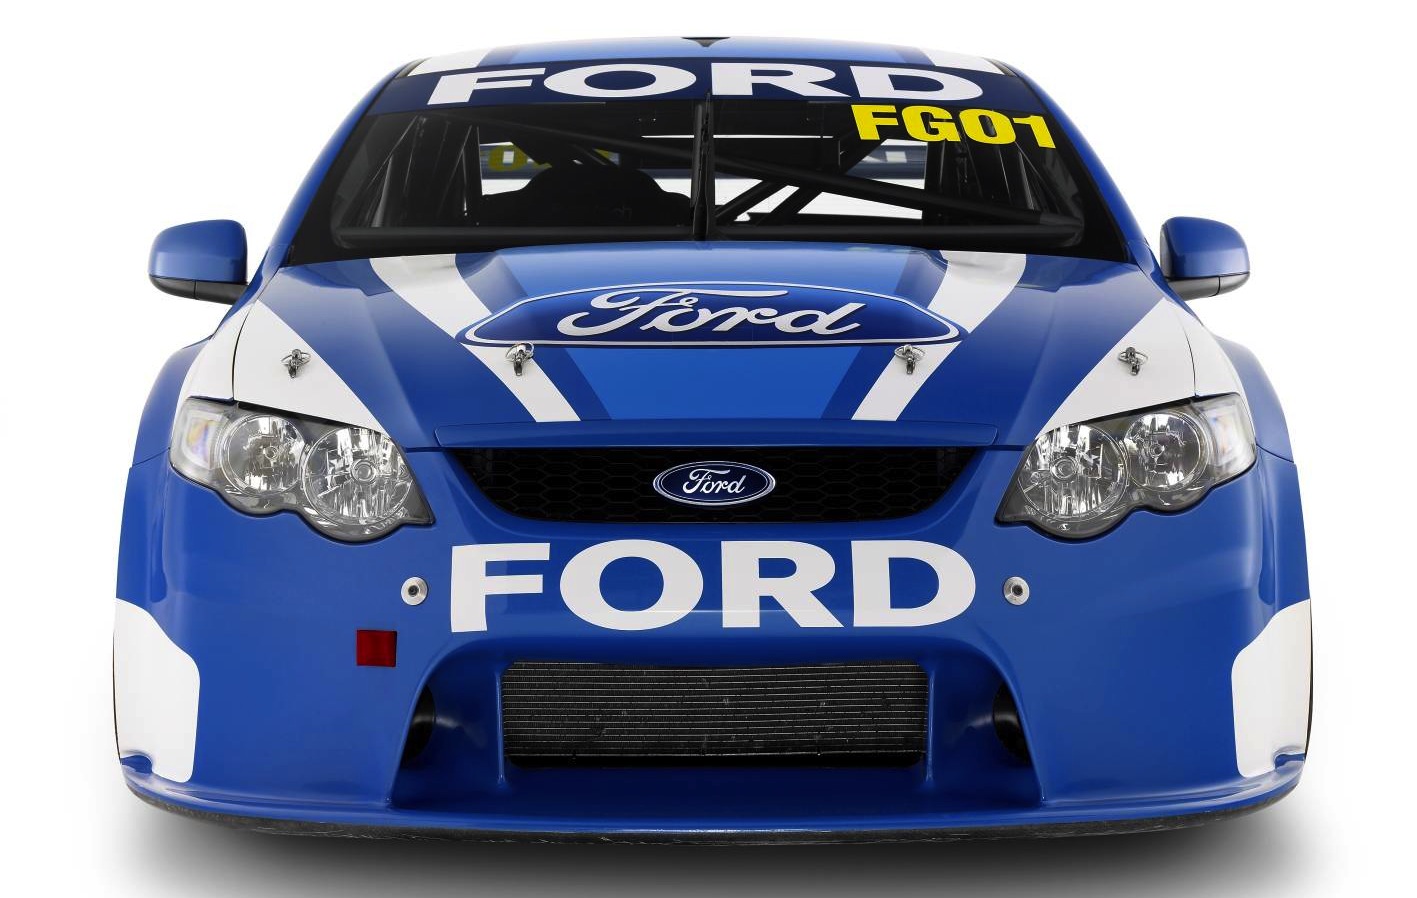 Ford out of V8 Supercars end of 2015, new Bathurst lap record